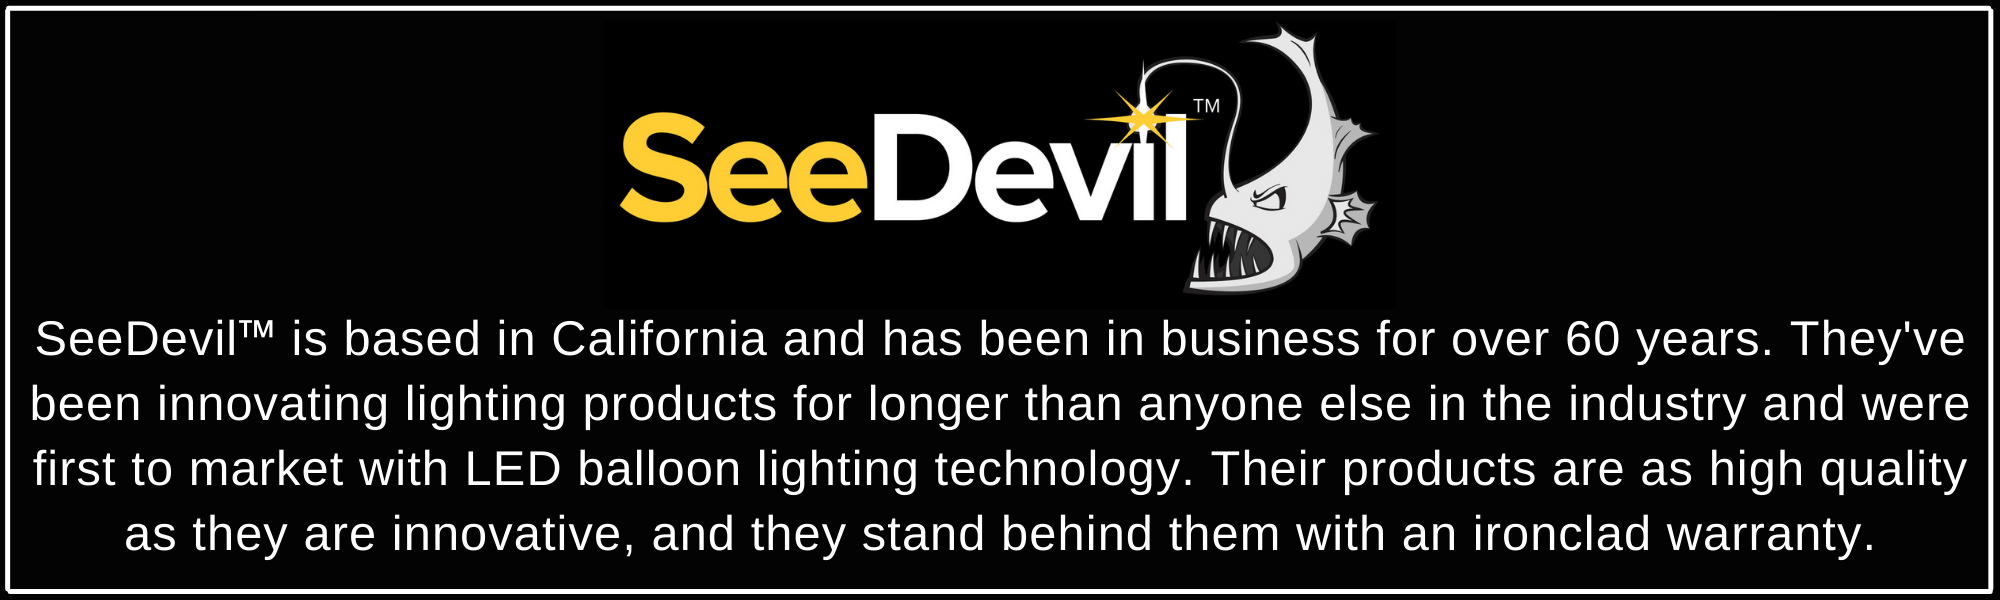 About the SeeDevil Lights Brand